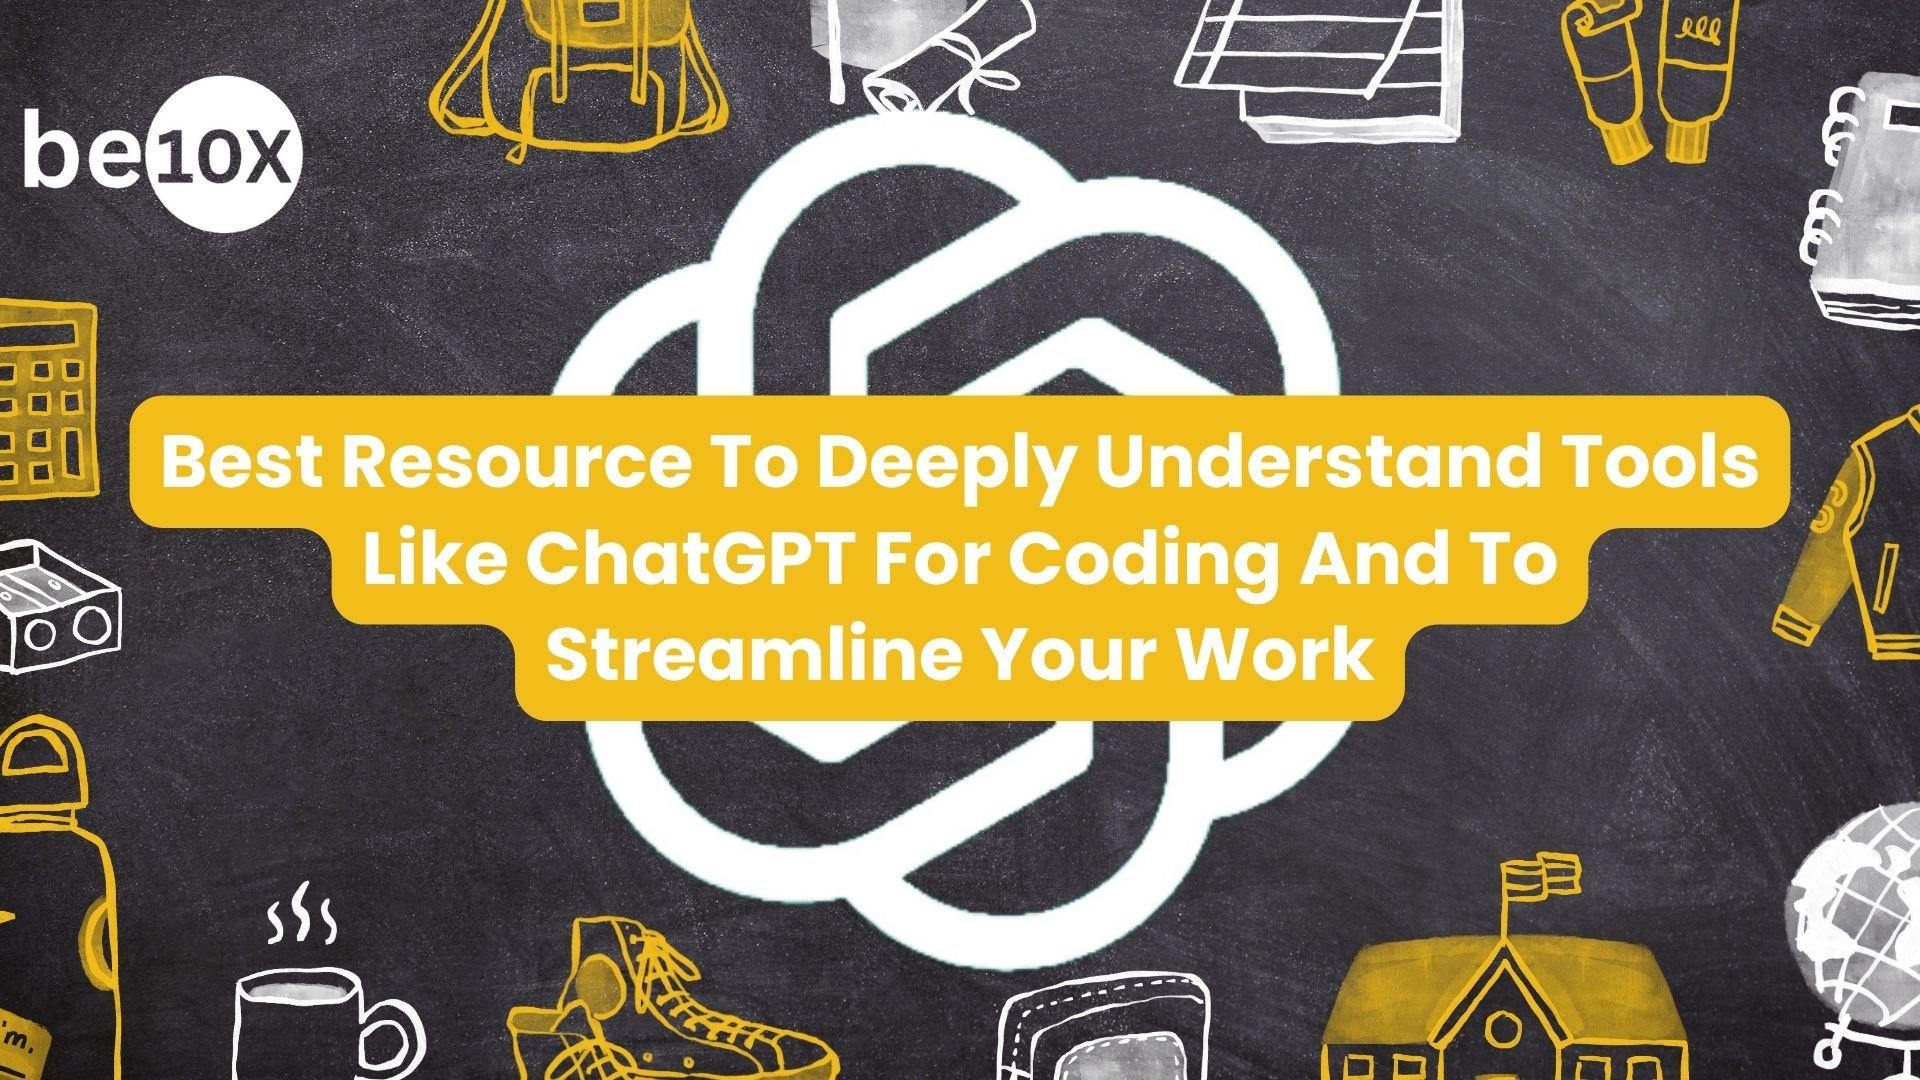 Best Resource To Deeply Understand Tools Like ChatGPT For Coding And To Streamline Your Work